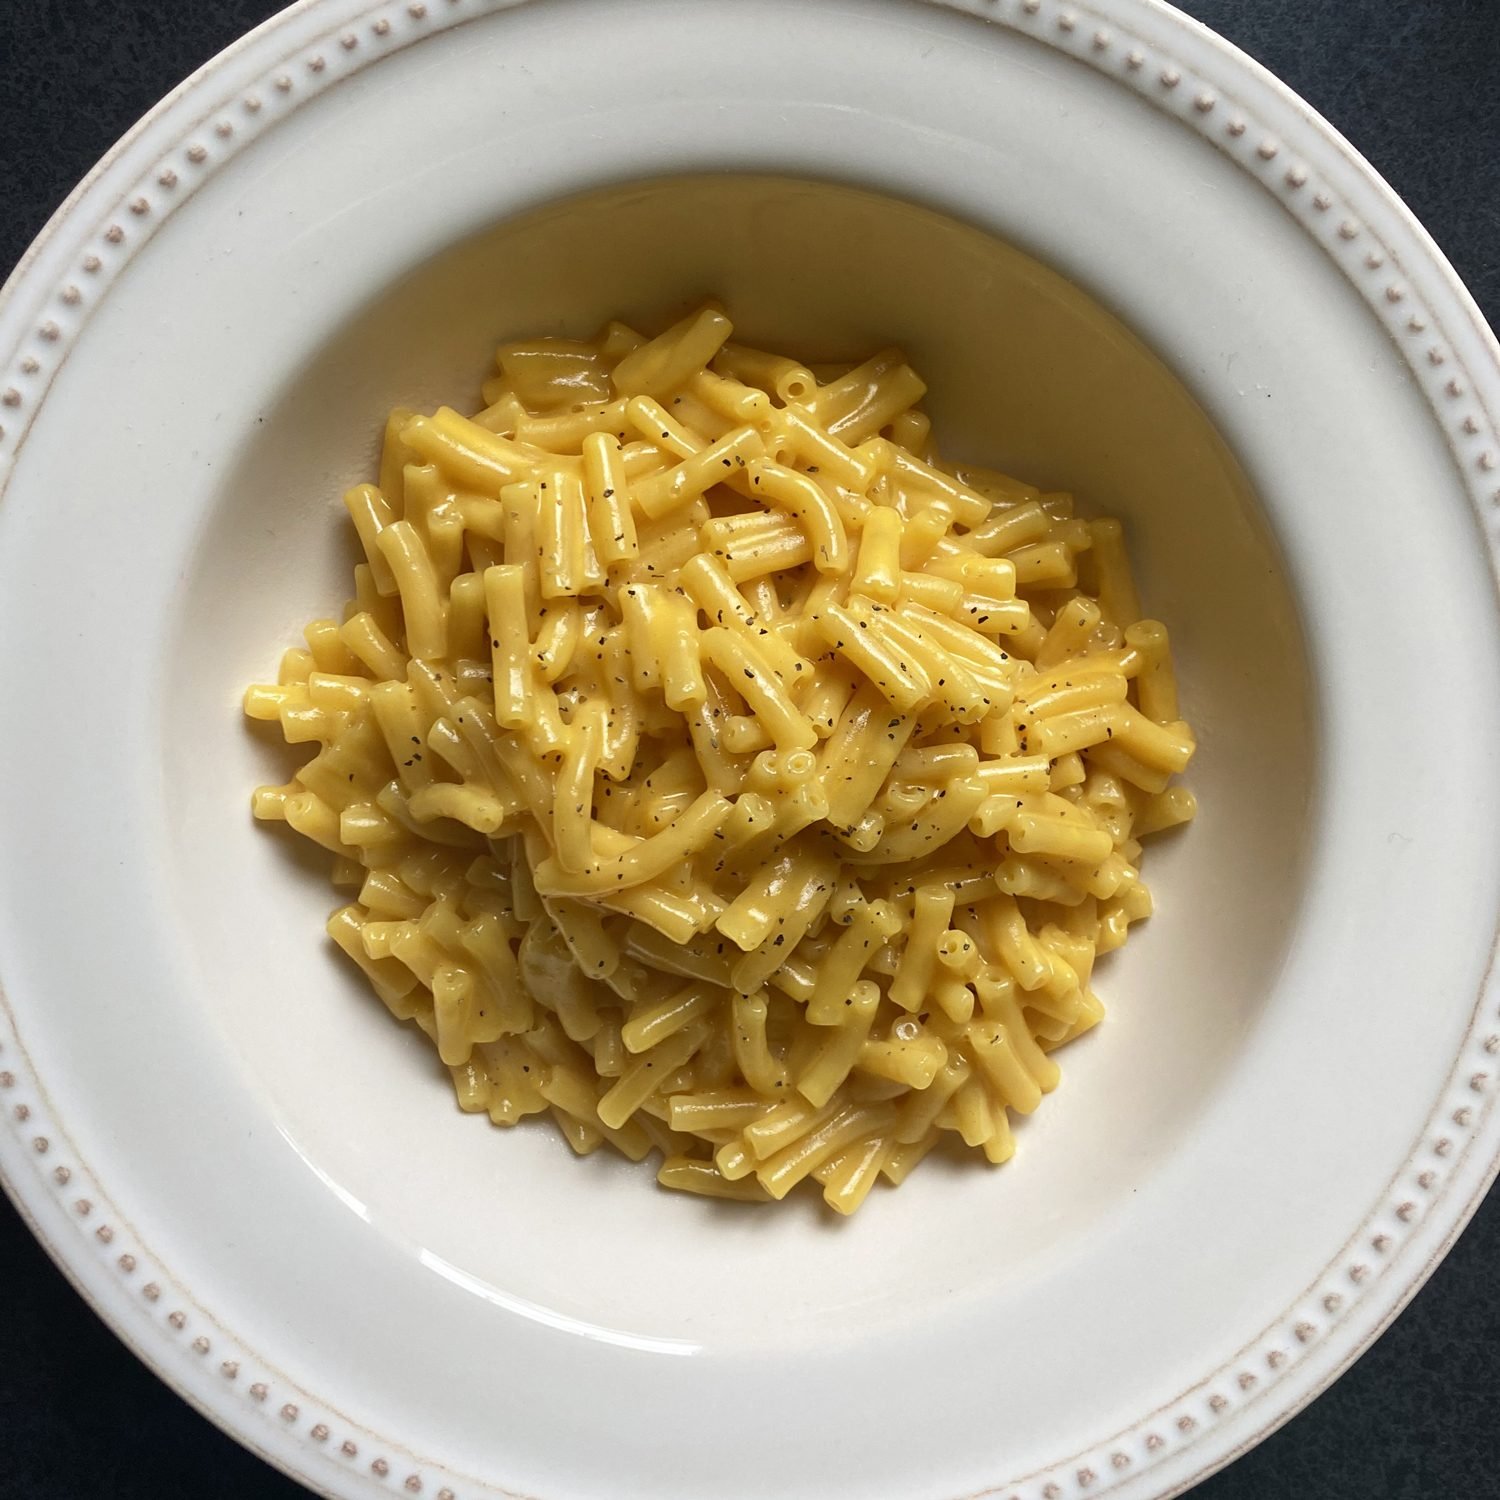 https://www.tasteofhome.com/wp-content/uploads/2021/09/tik-tok-mac-and-cheese01_Hannah-Twietmeyer-for-Taste-of-Home.jpg